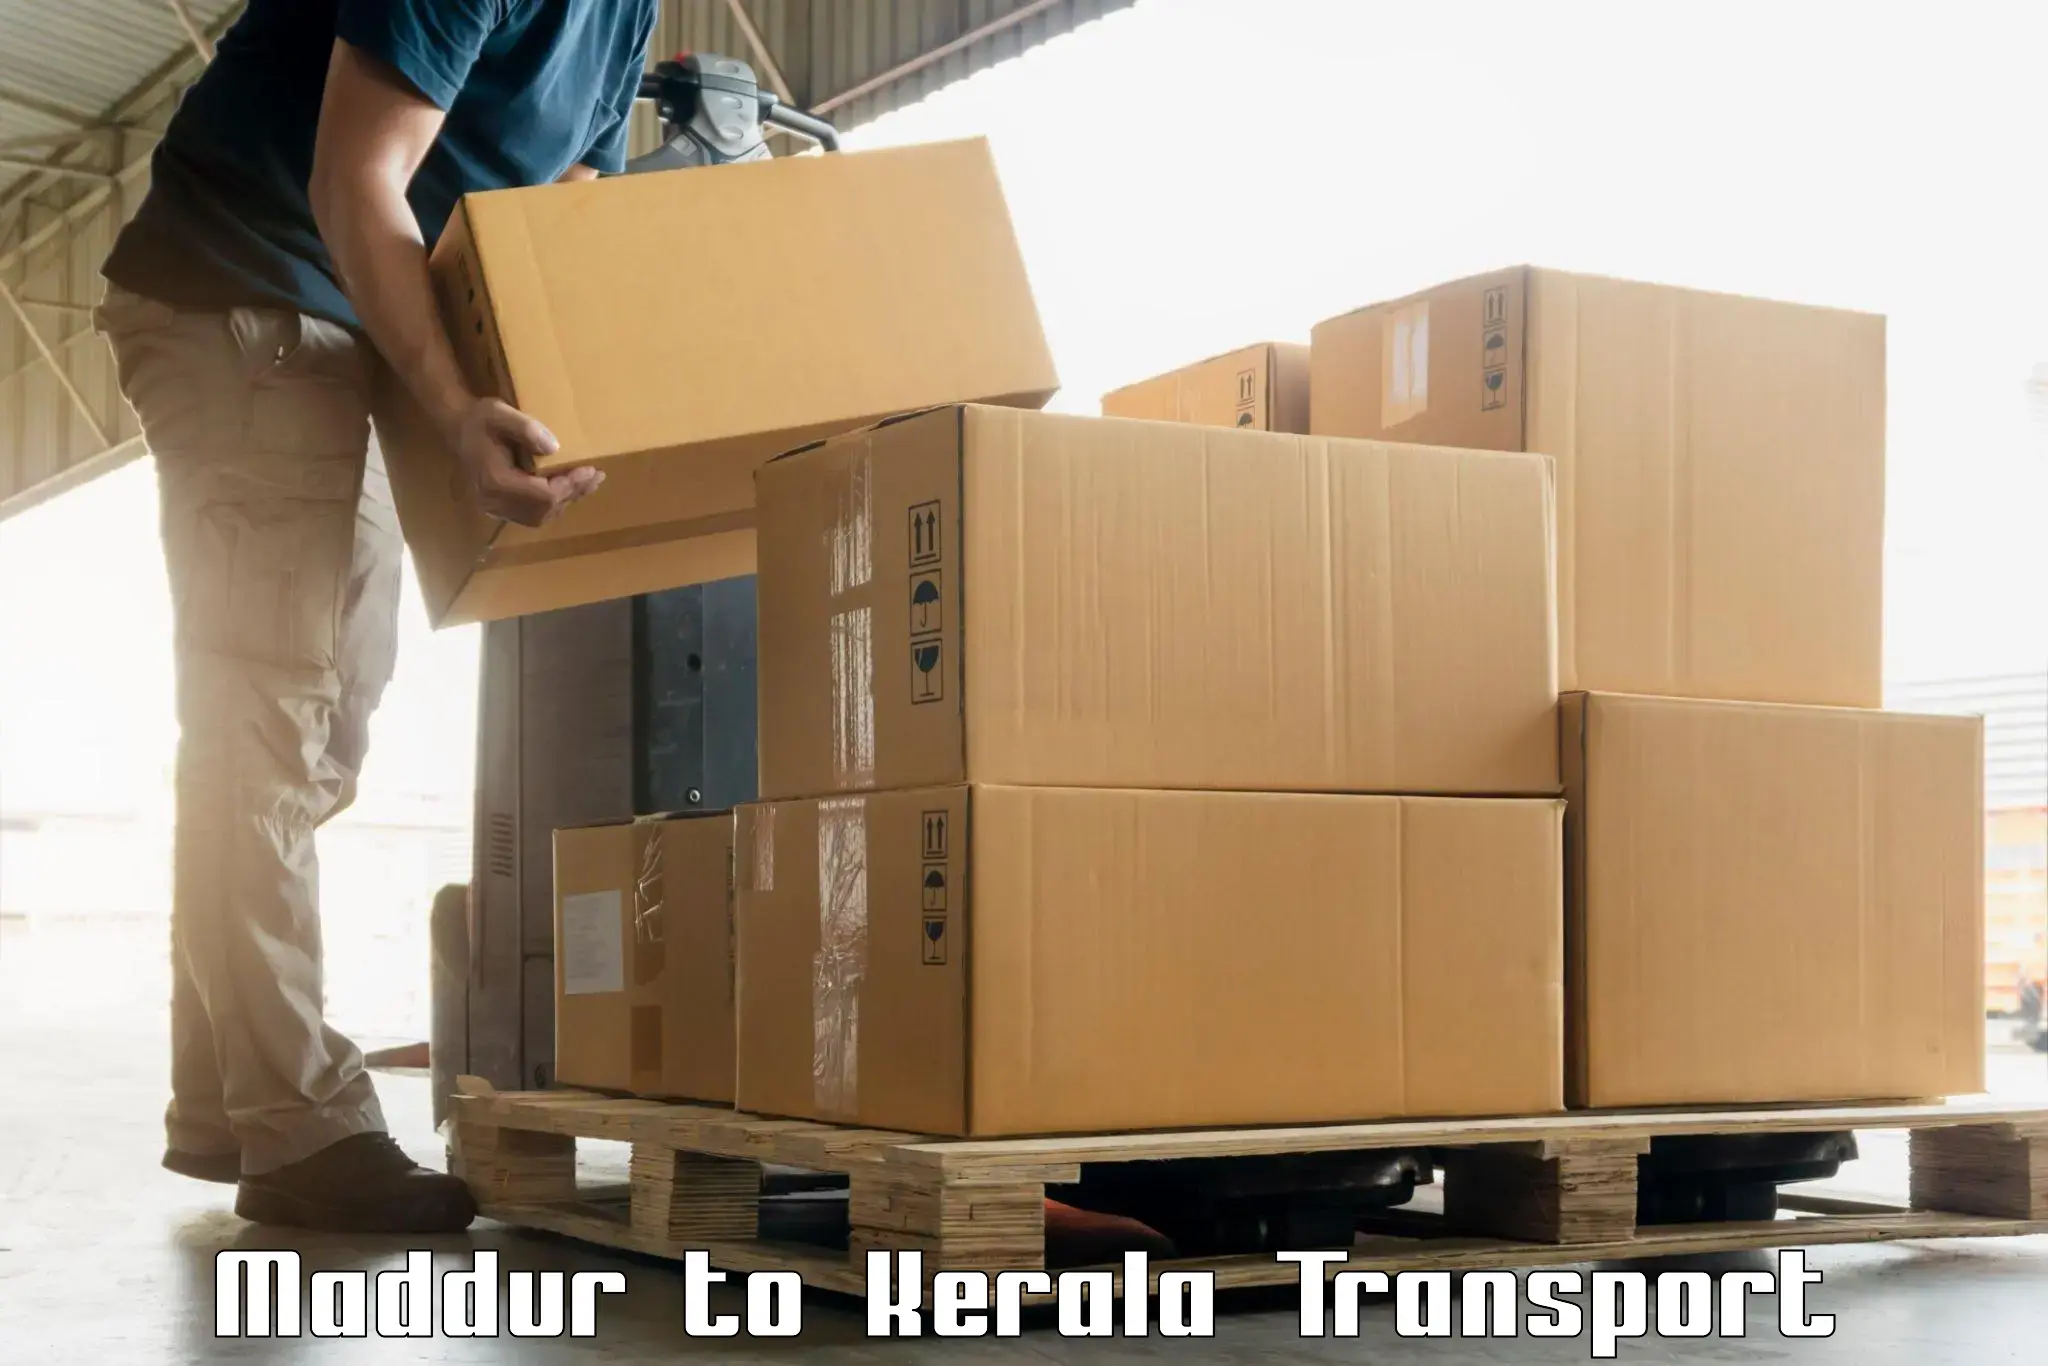 Goods delivery service Maddur to Kerala